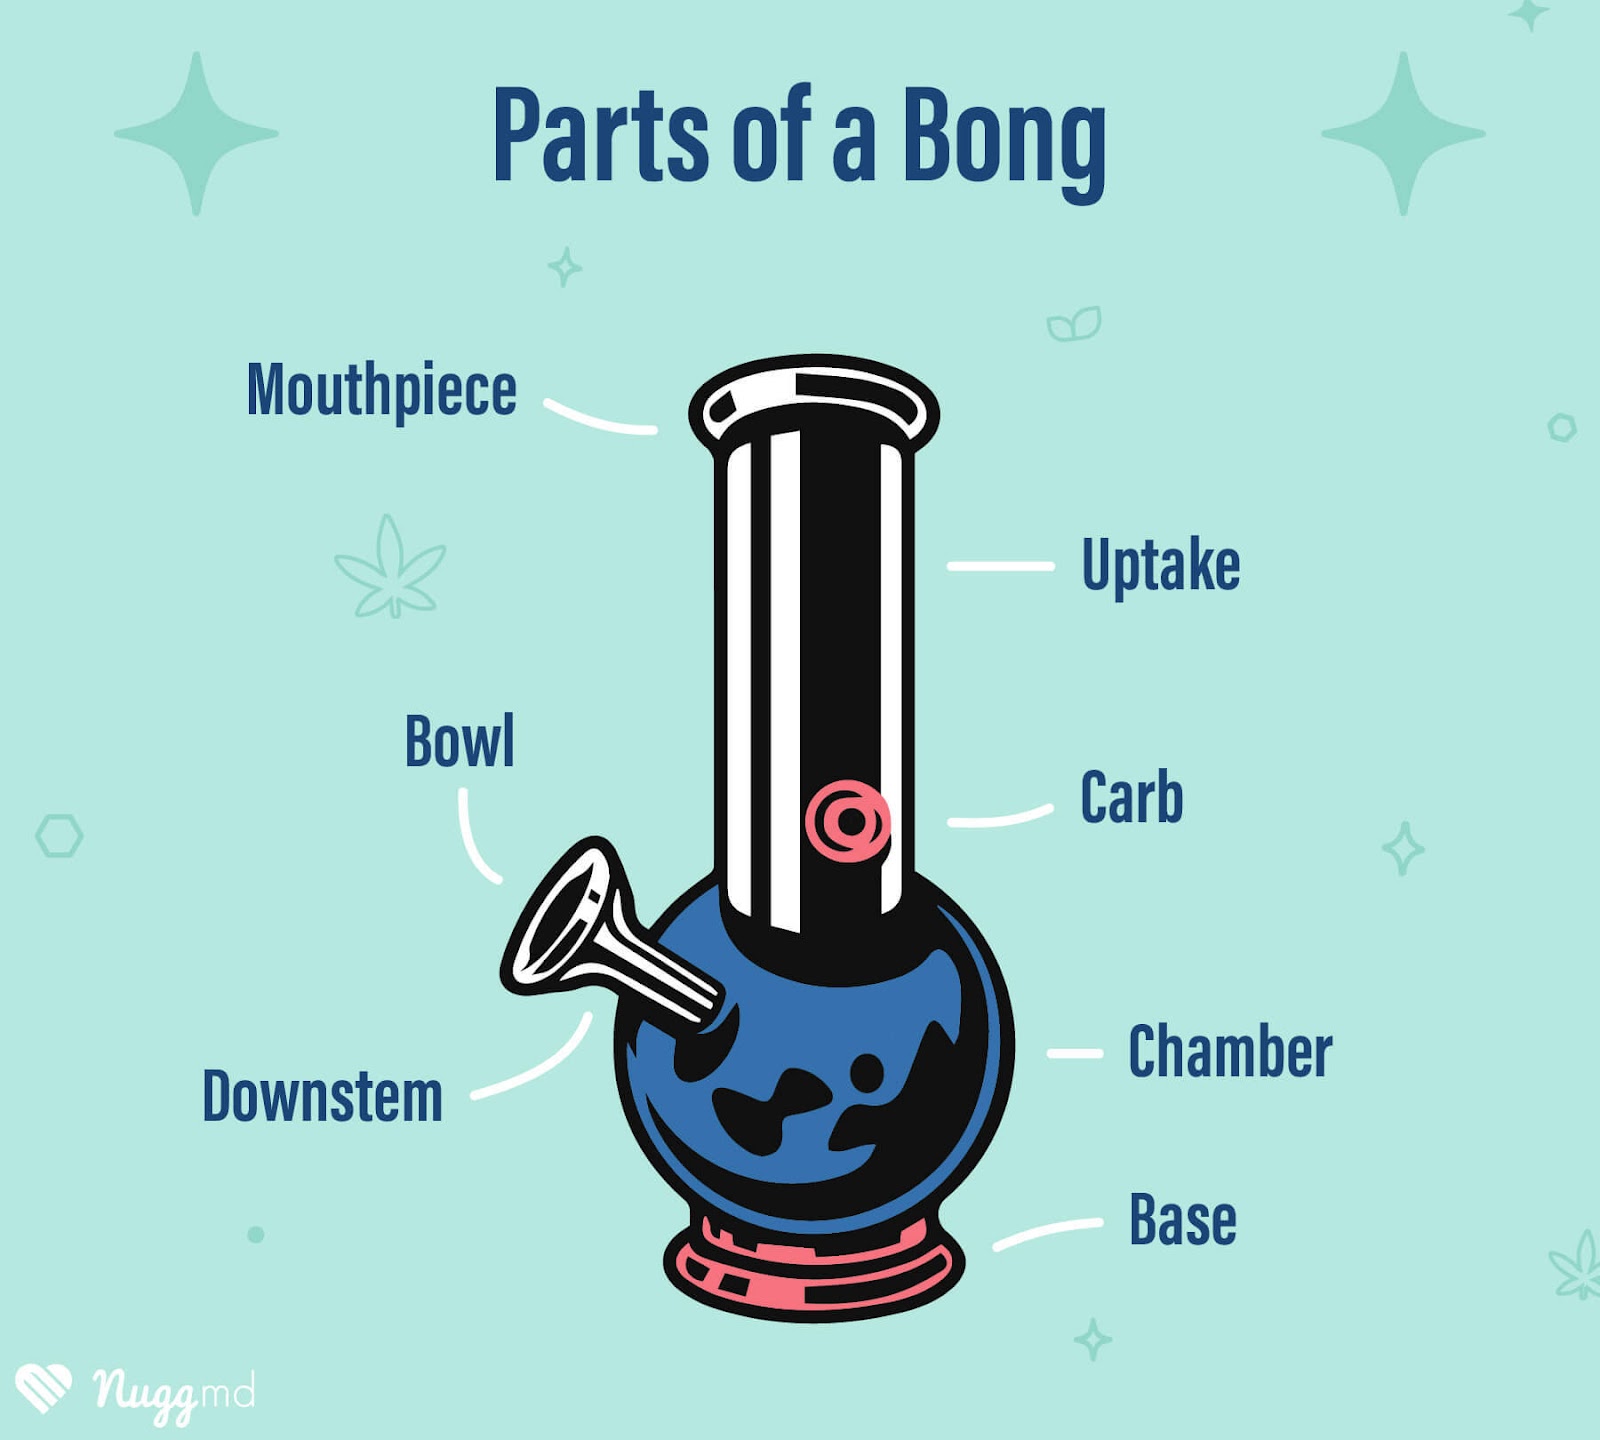 How to Use a Bong: A Step-by-Step Guide for Smoking Weed – The